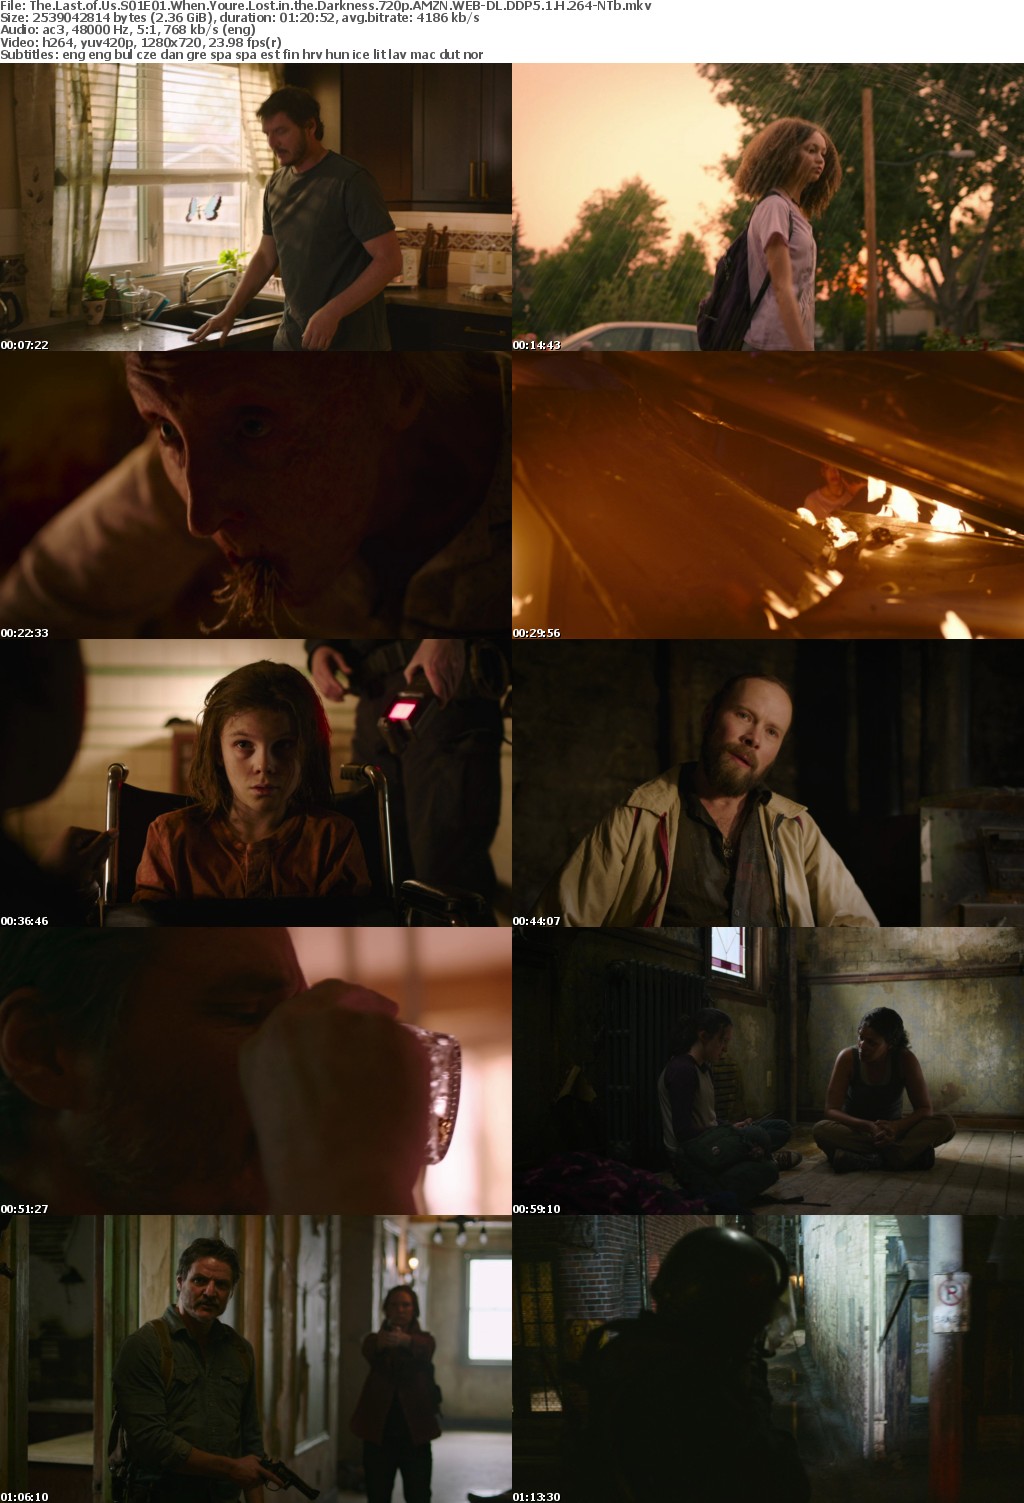 The Last of Us S01E01 When Youre Lost in the Darkness 720p AMZN WEBRip DDP5 1 x264-NTb